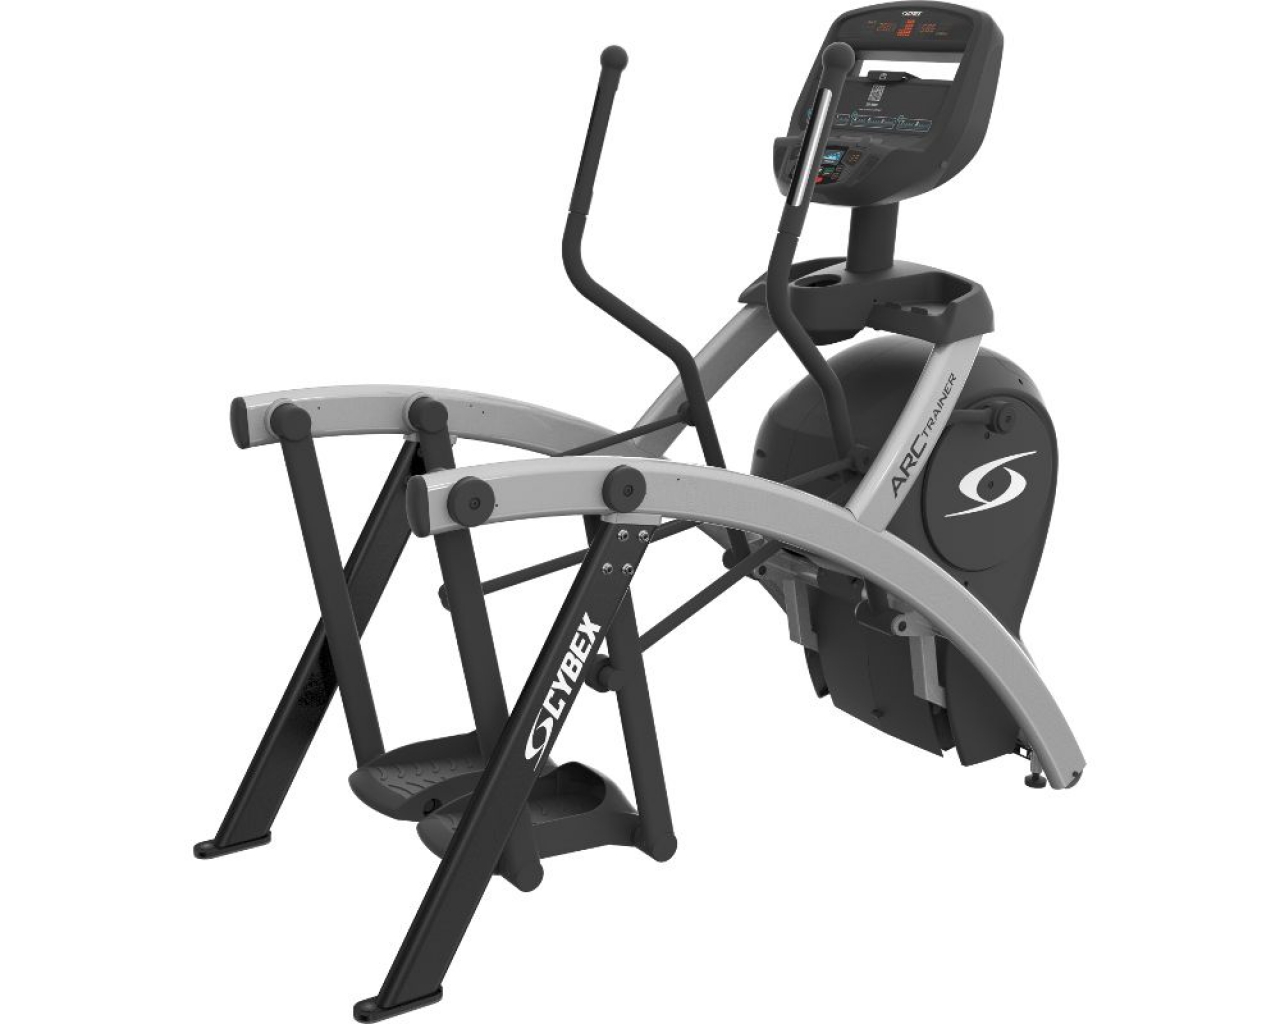 Cybex 525AT Total Body ARC Trainer